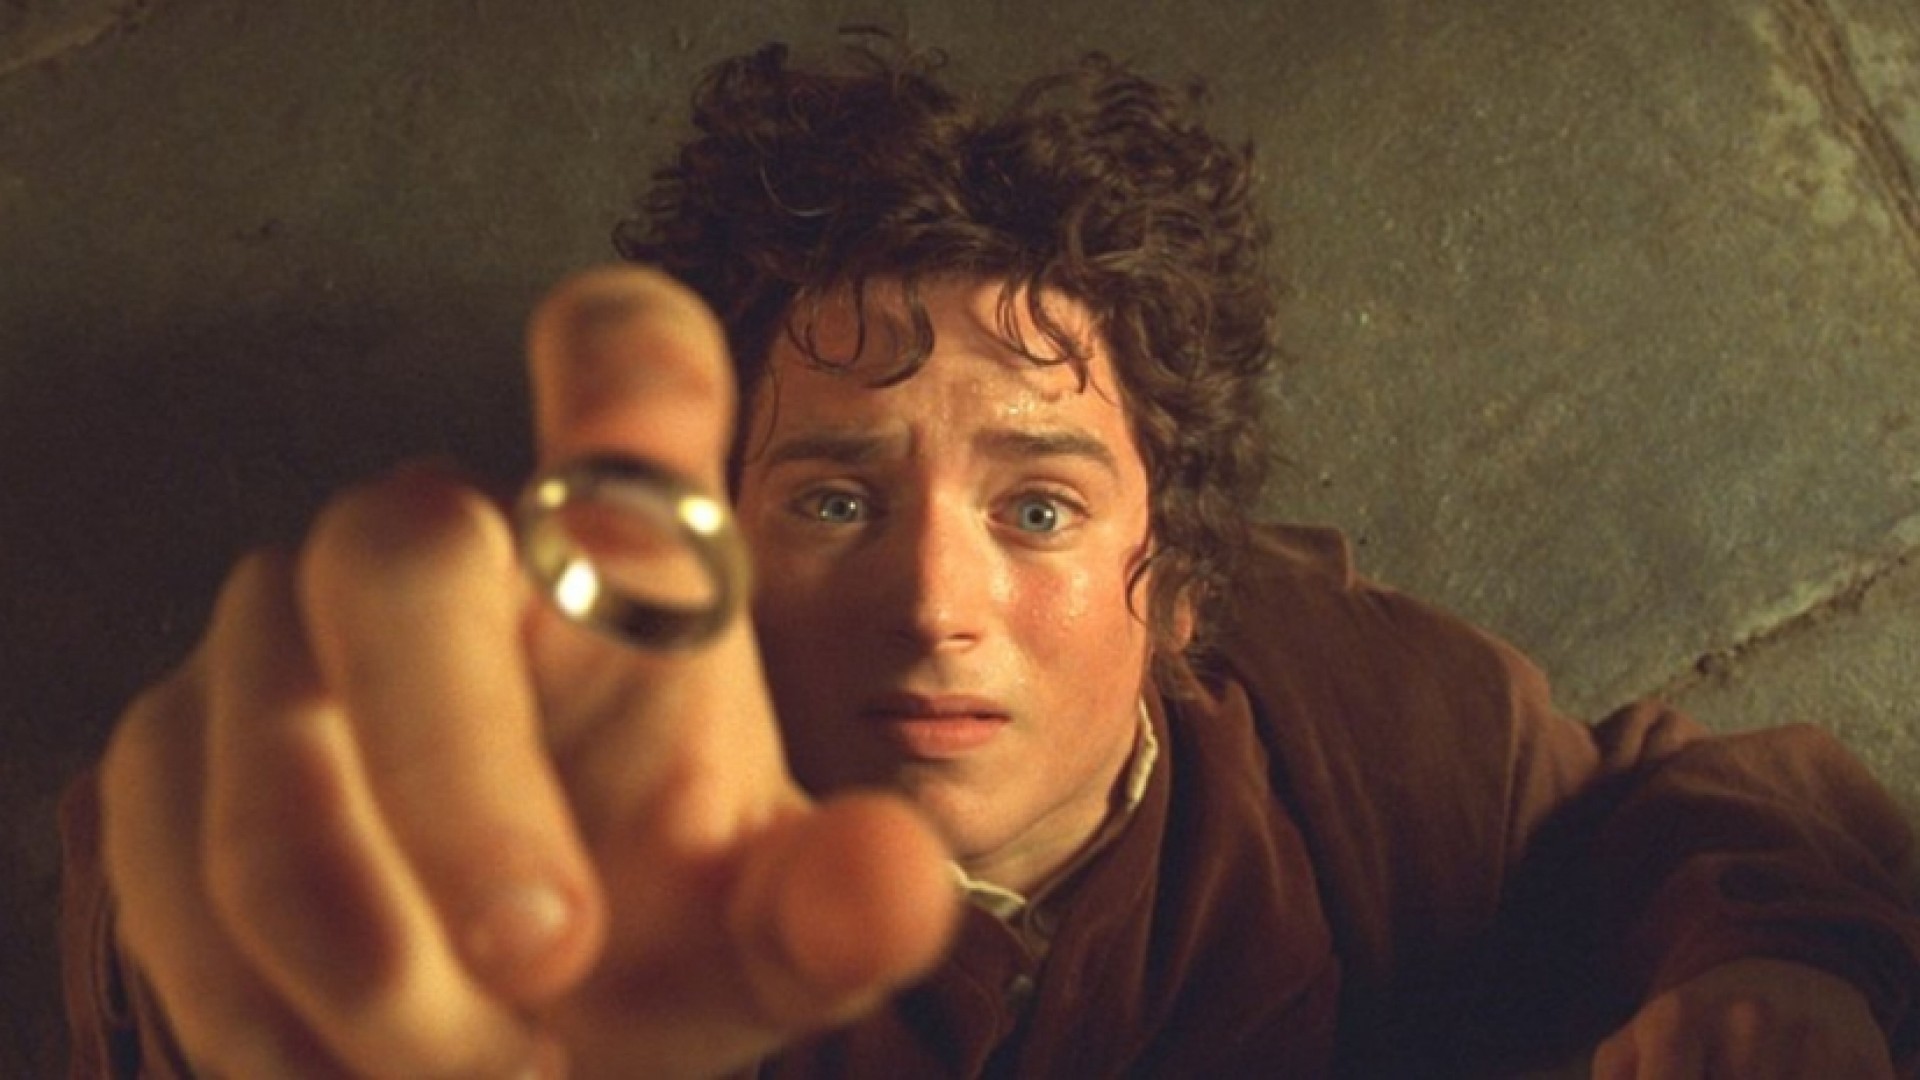 The Lord of the Rings: The Fellowship of the Rings